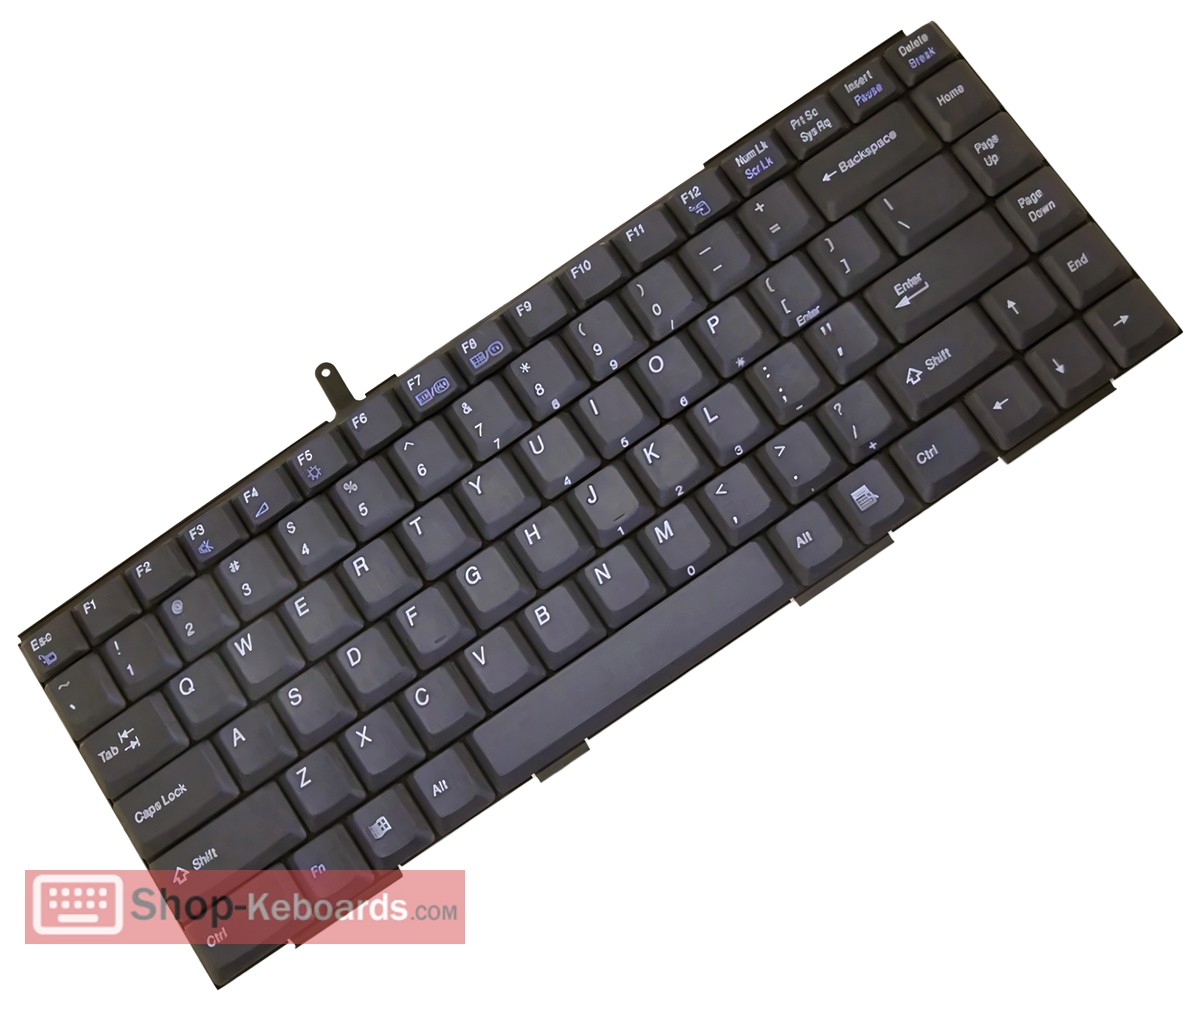 Sony VAIO PCG-F540K Keyboard replacement